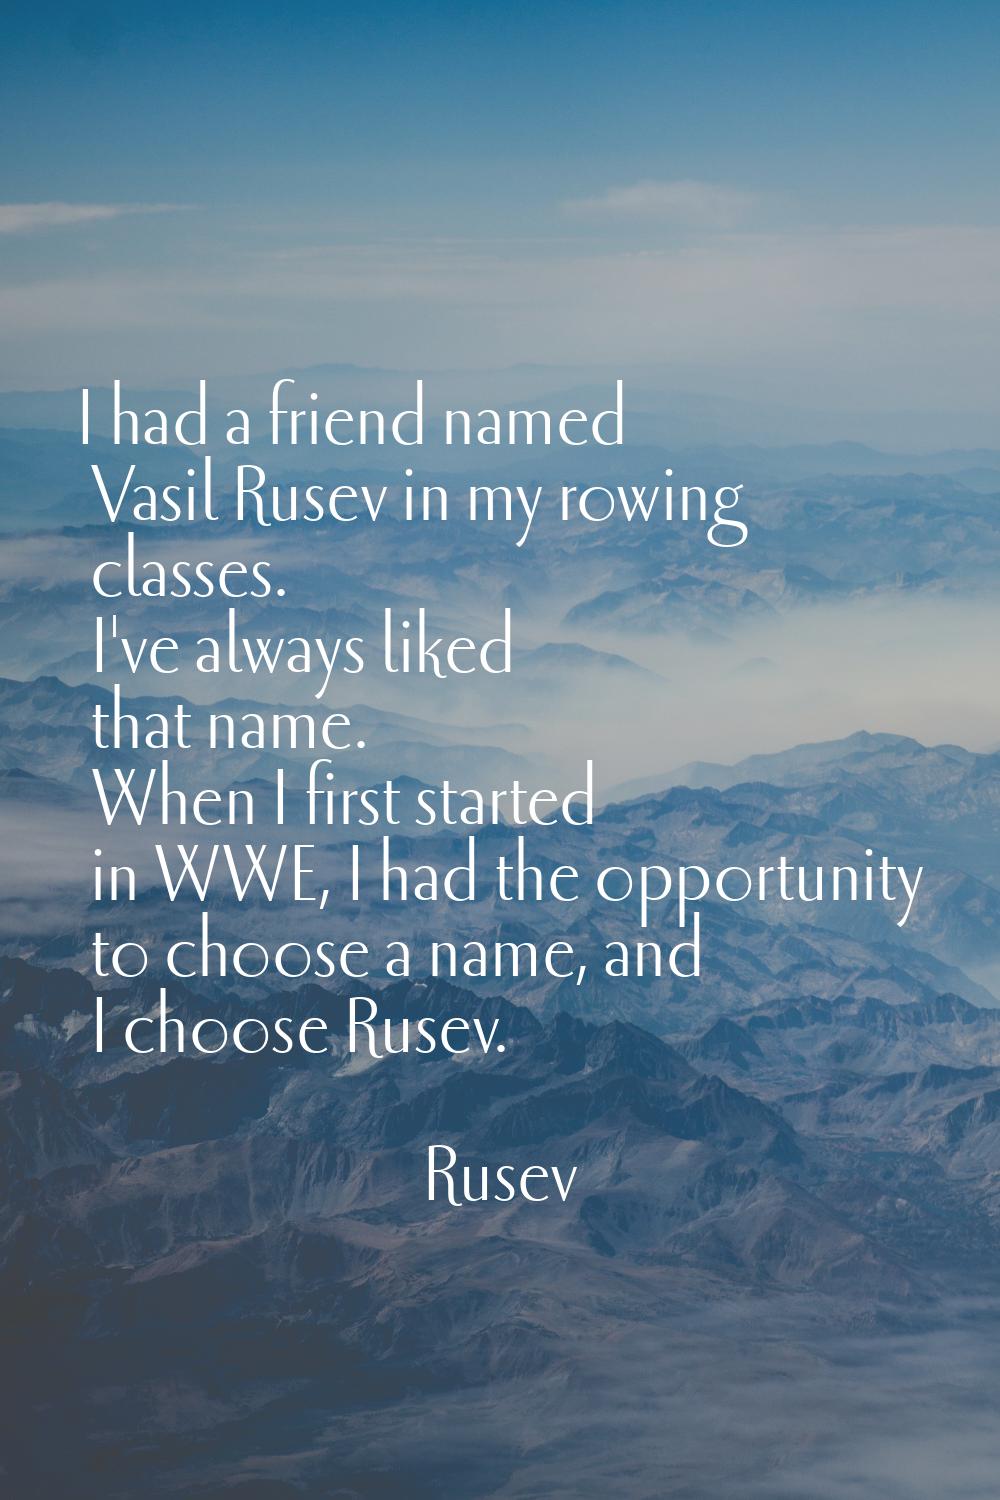 I had a friend named Vasil Rusev in my rowing classes. I've always liked that name. When I first st